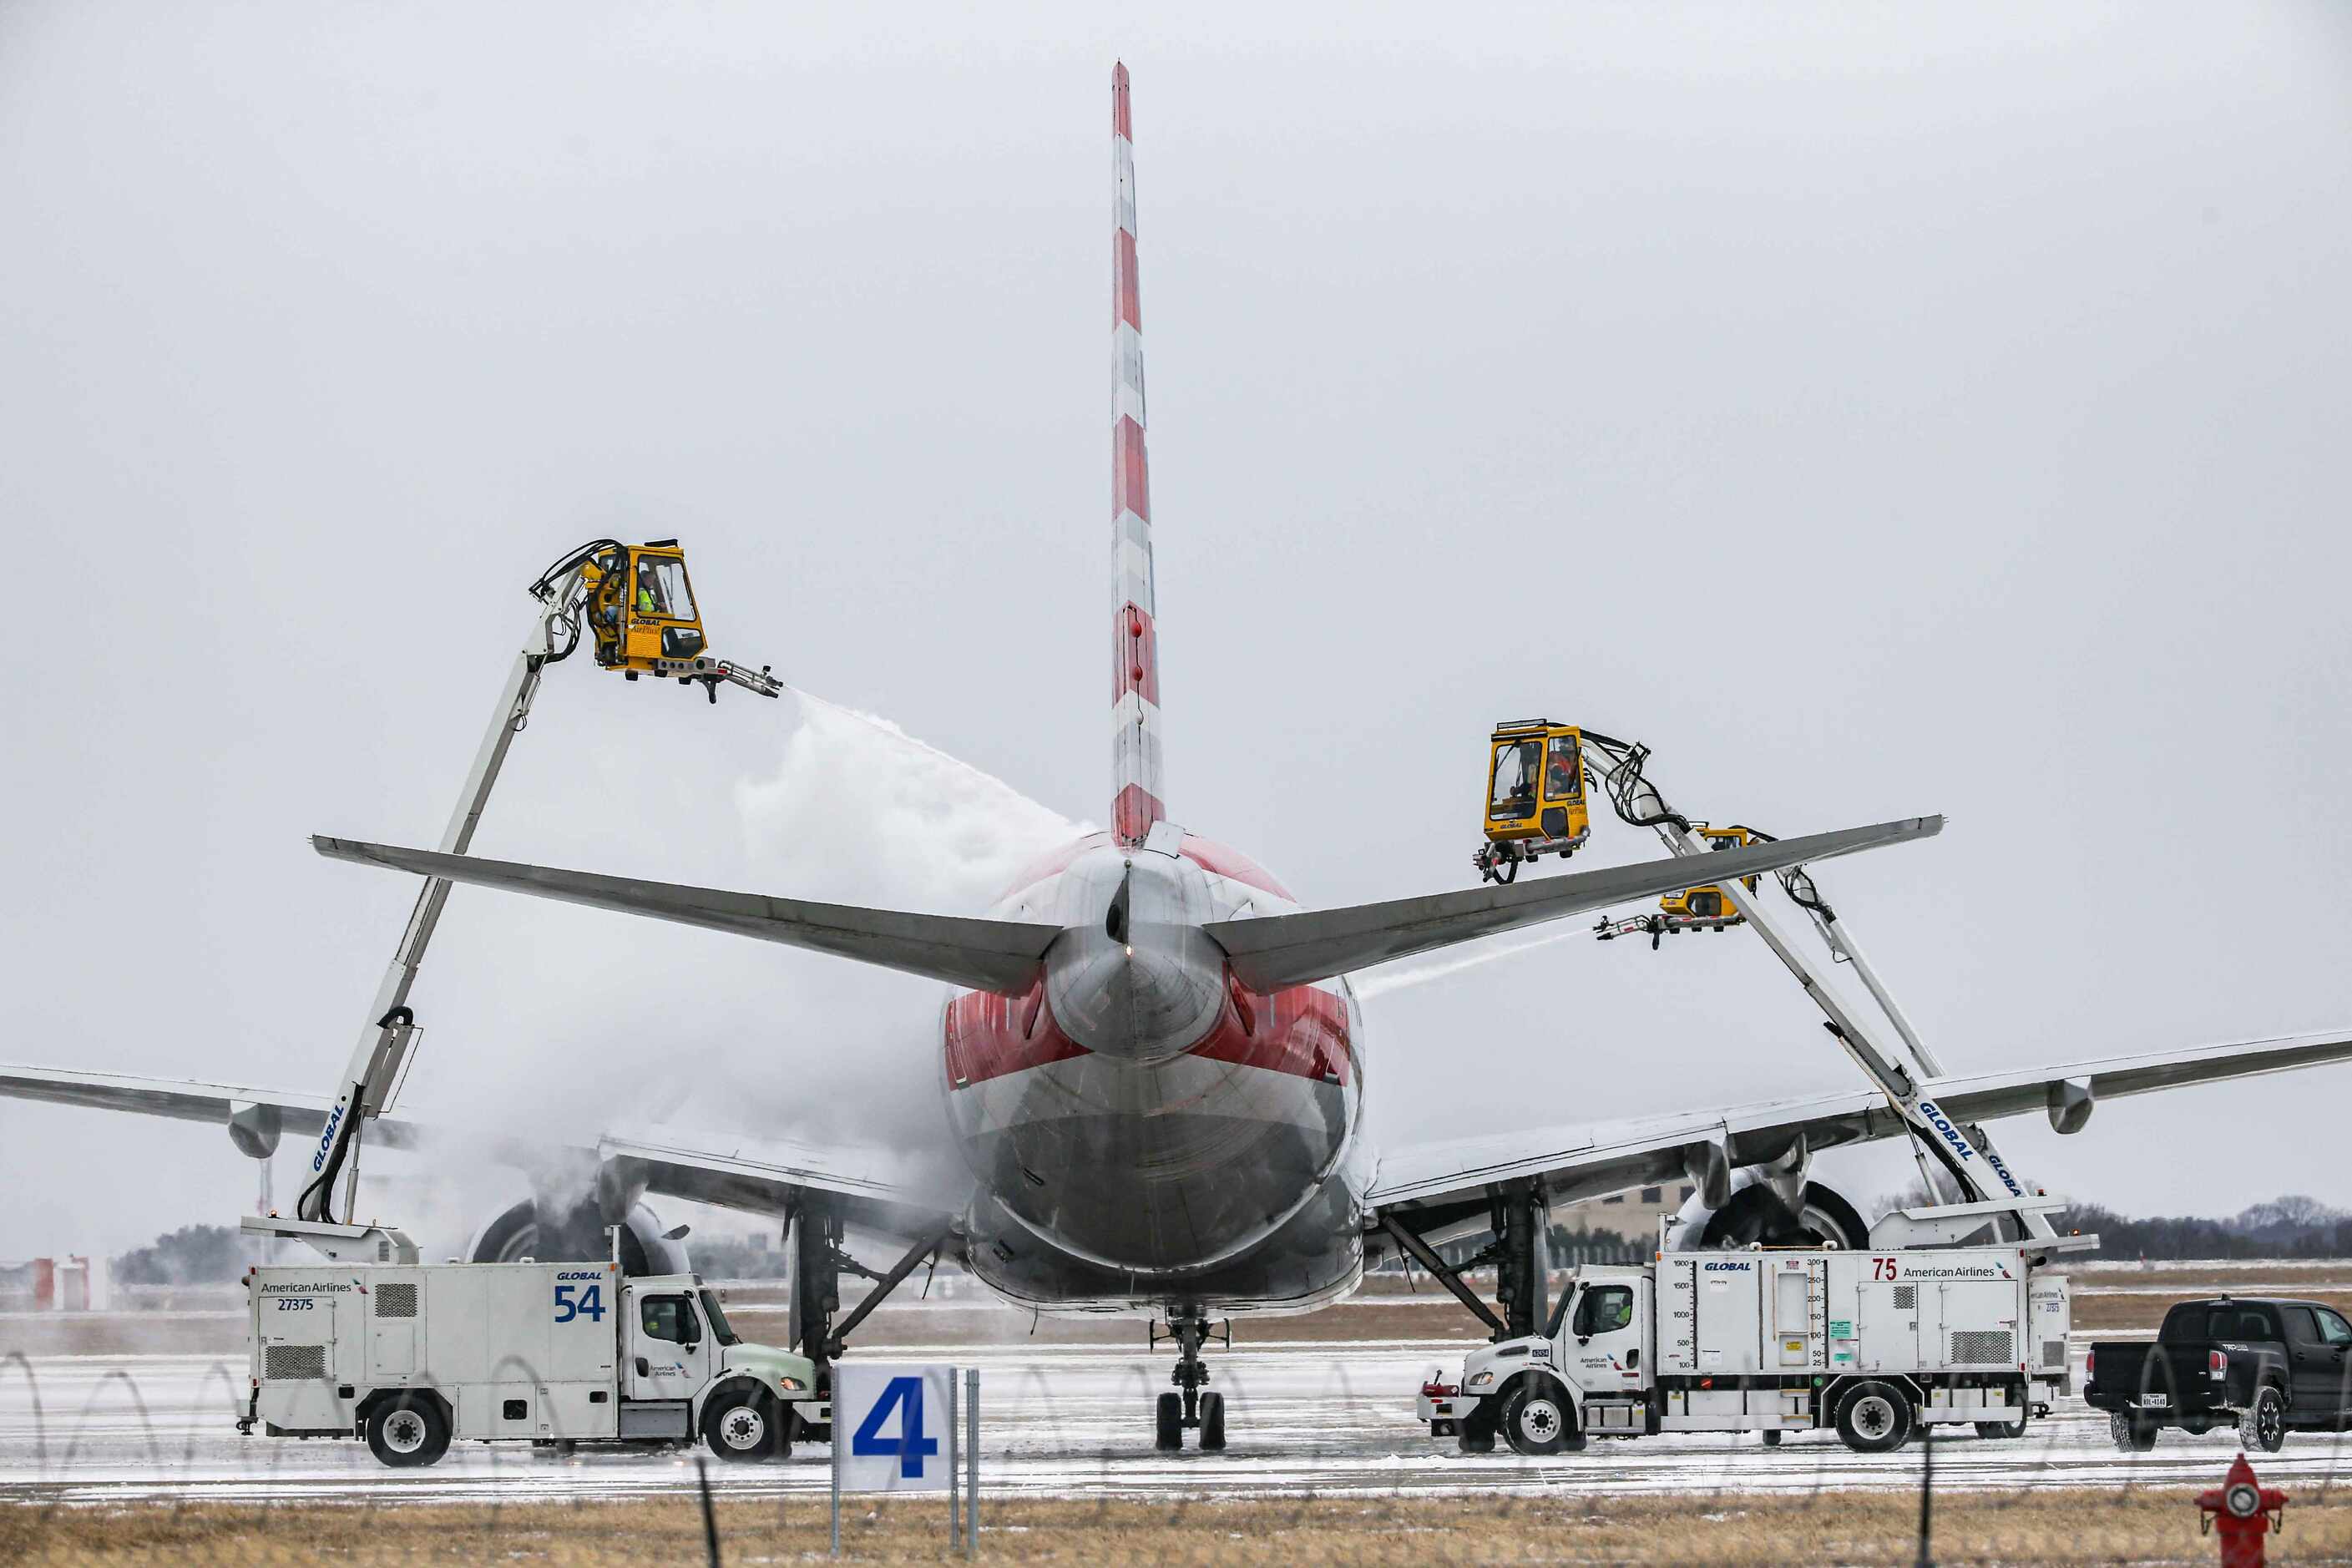 An American Airlines jet is de-iced at DFW International Airport before takeoff as winter...